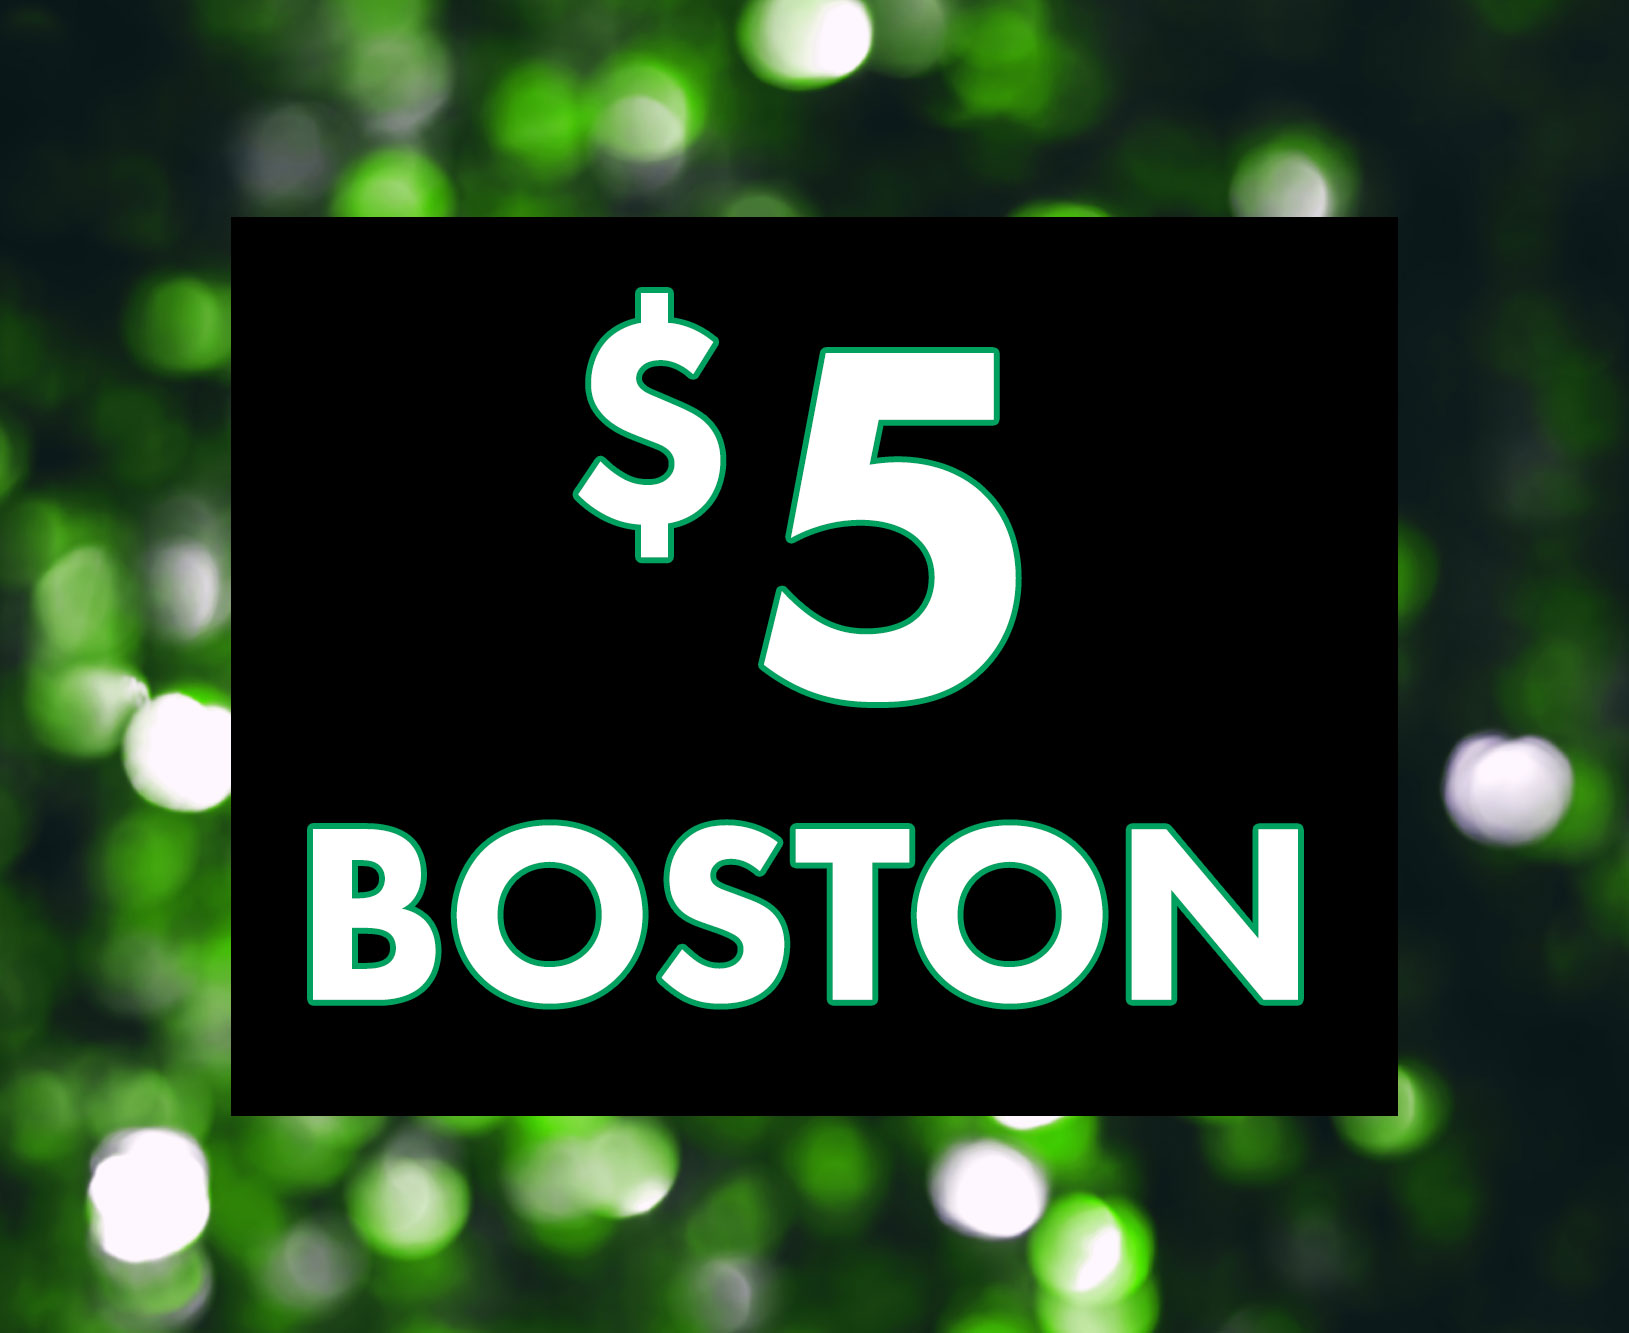 Travel with Peter Pan to Boston, Ma for Fares as LOW as $5!